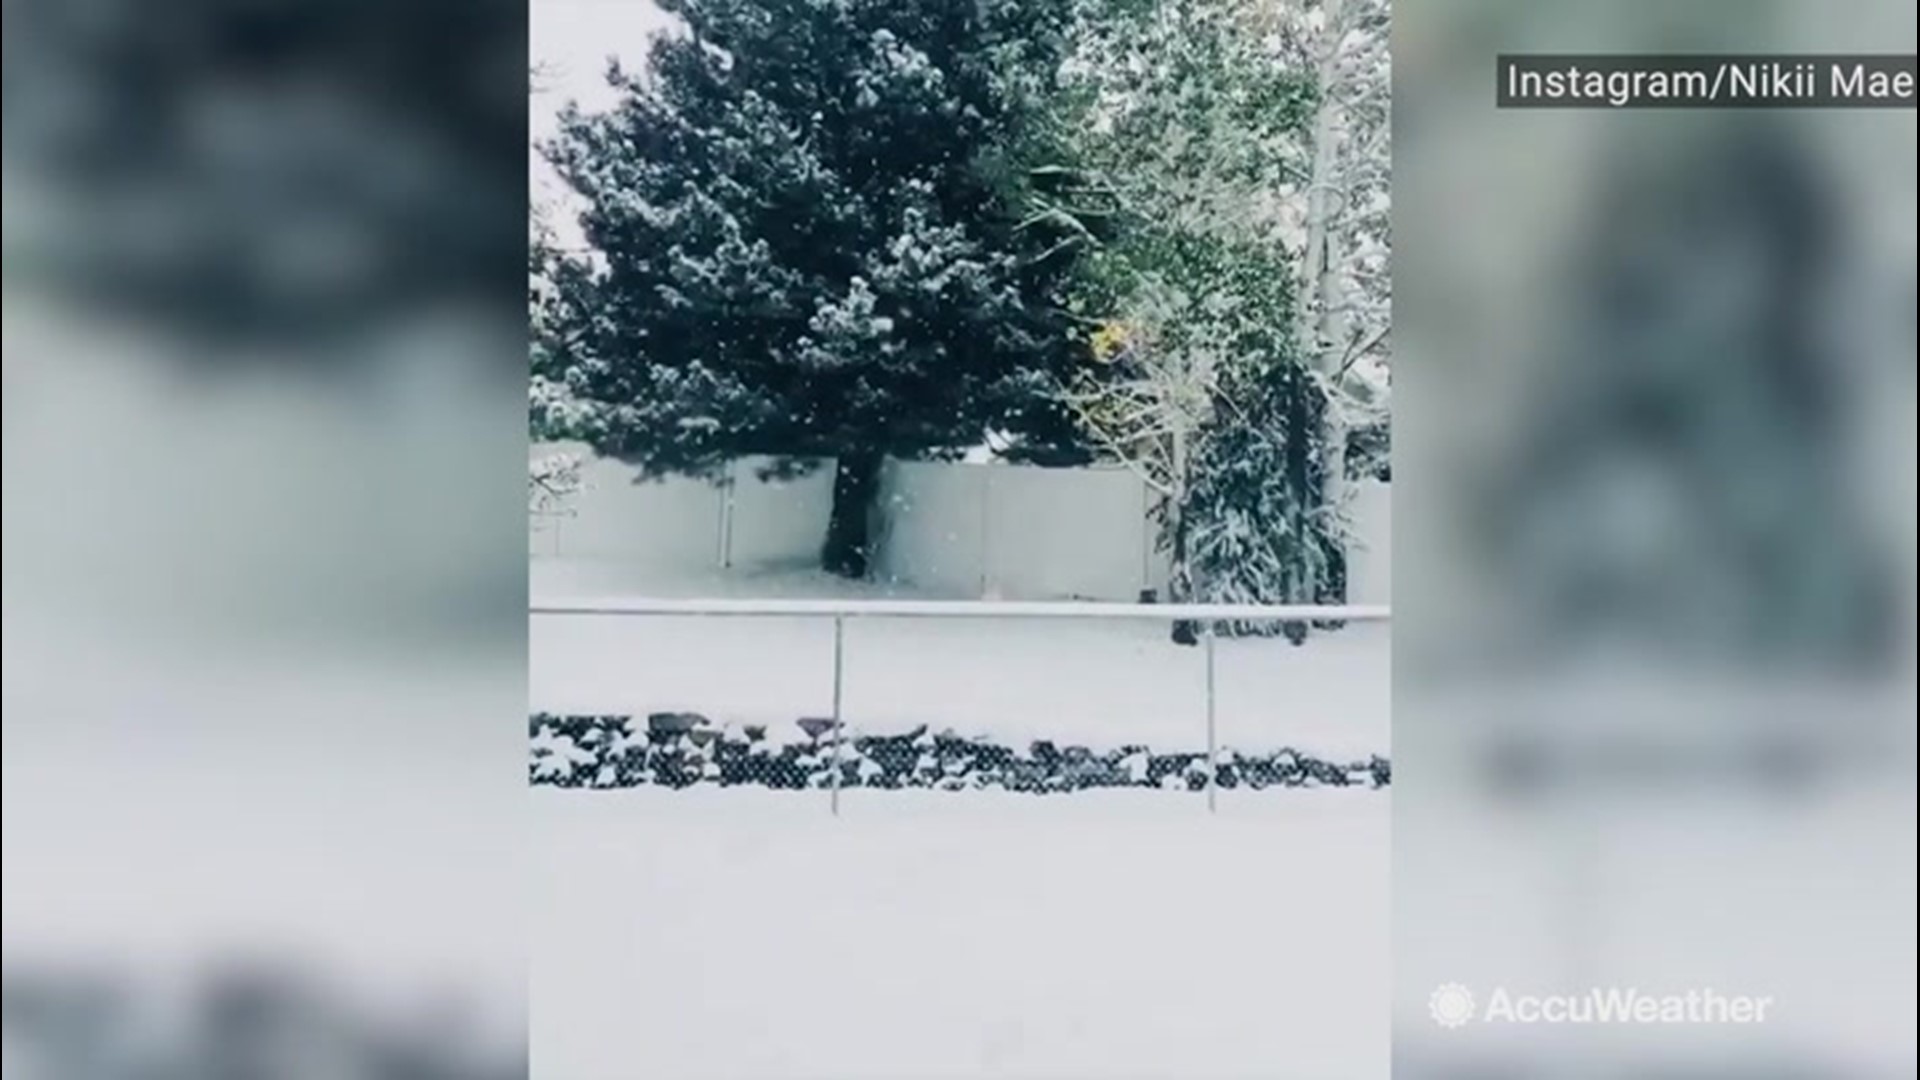 Billings, Montana, received another round of early snowfall on Oct. 9, that left the area looking like a winter wonderland.